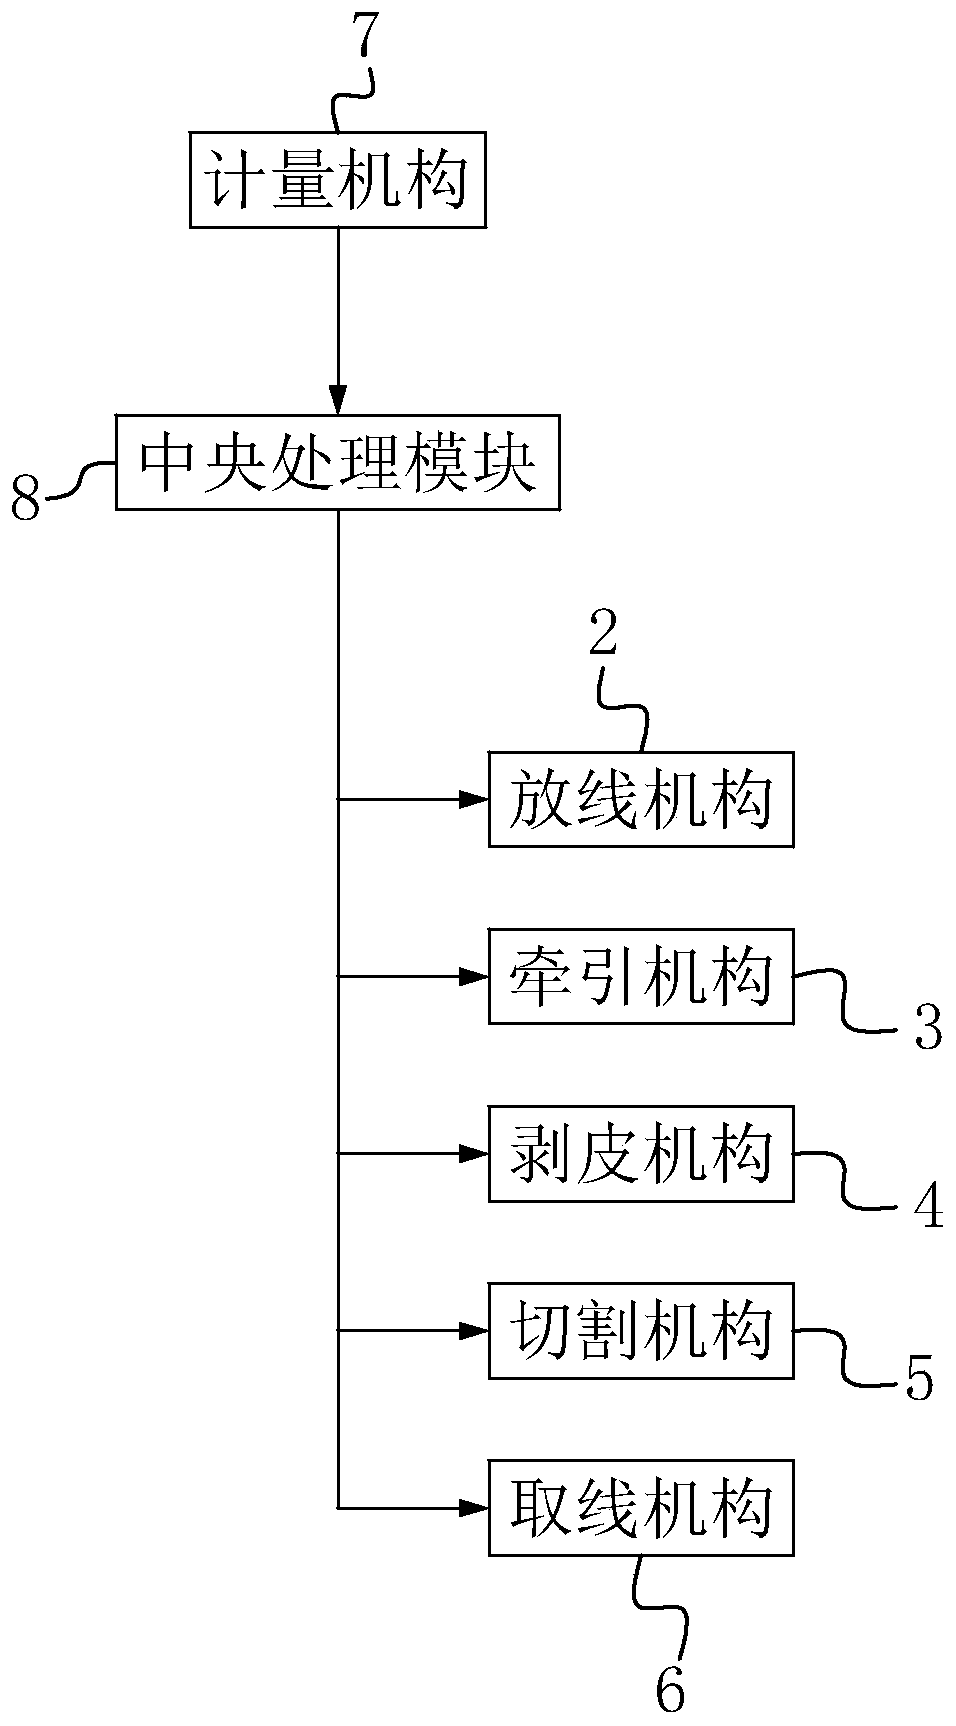 Production process of wire harness with wiring terminal